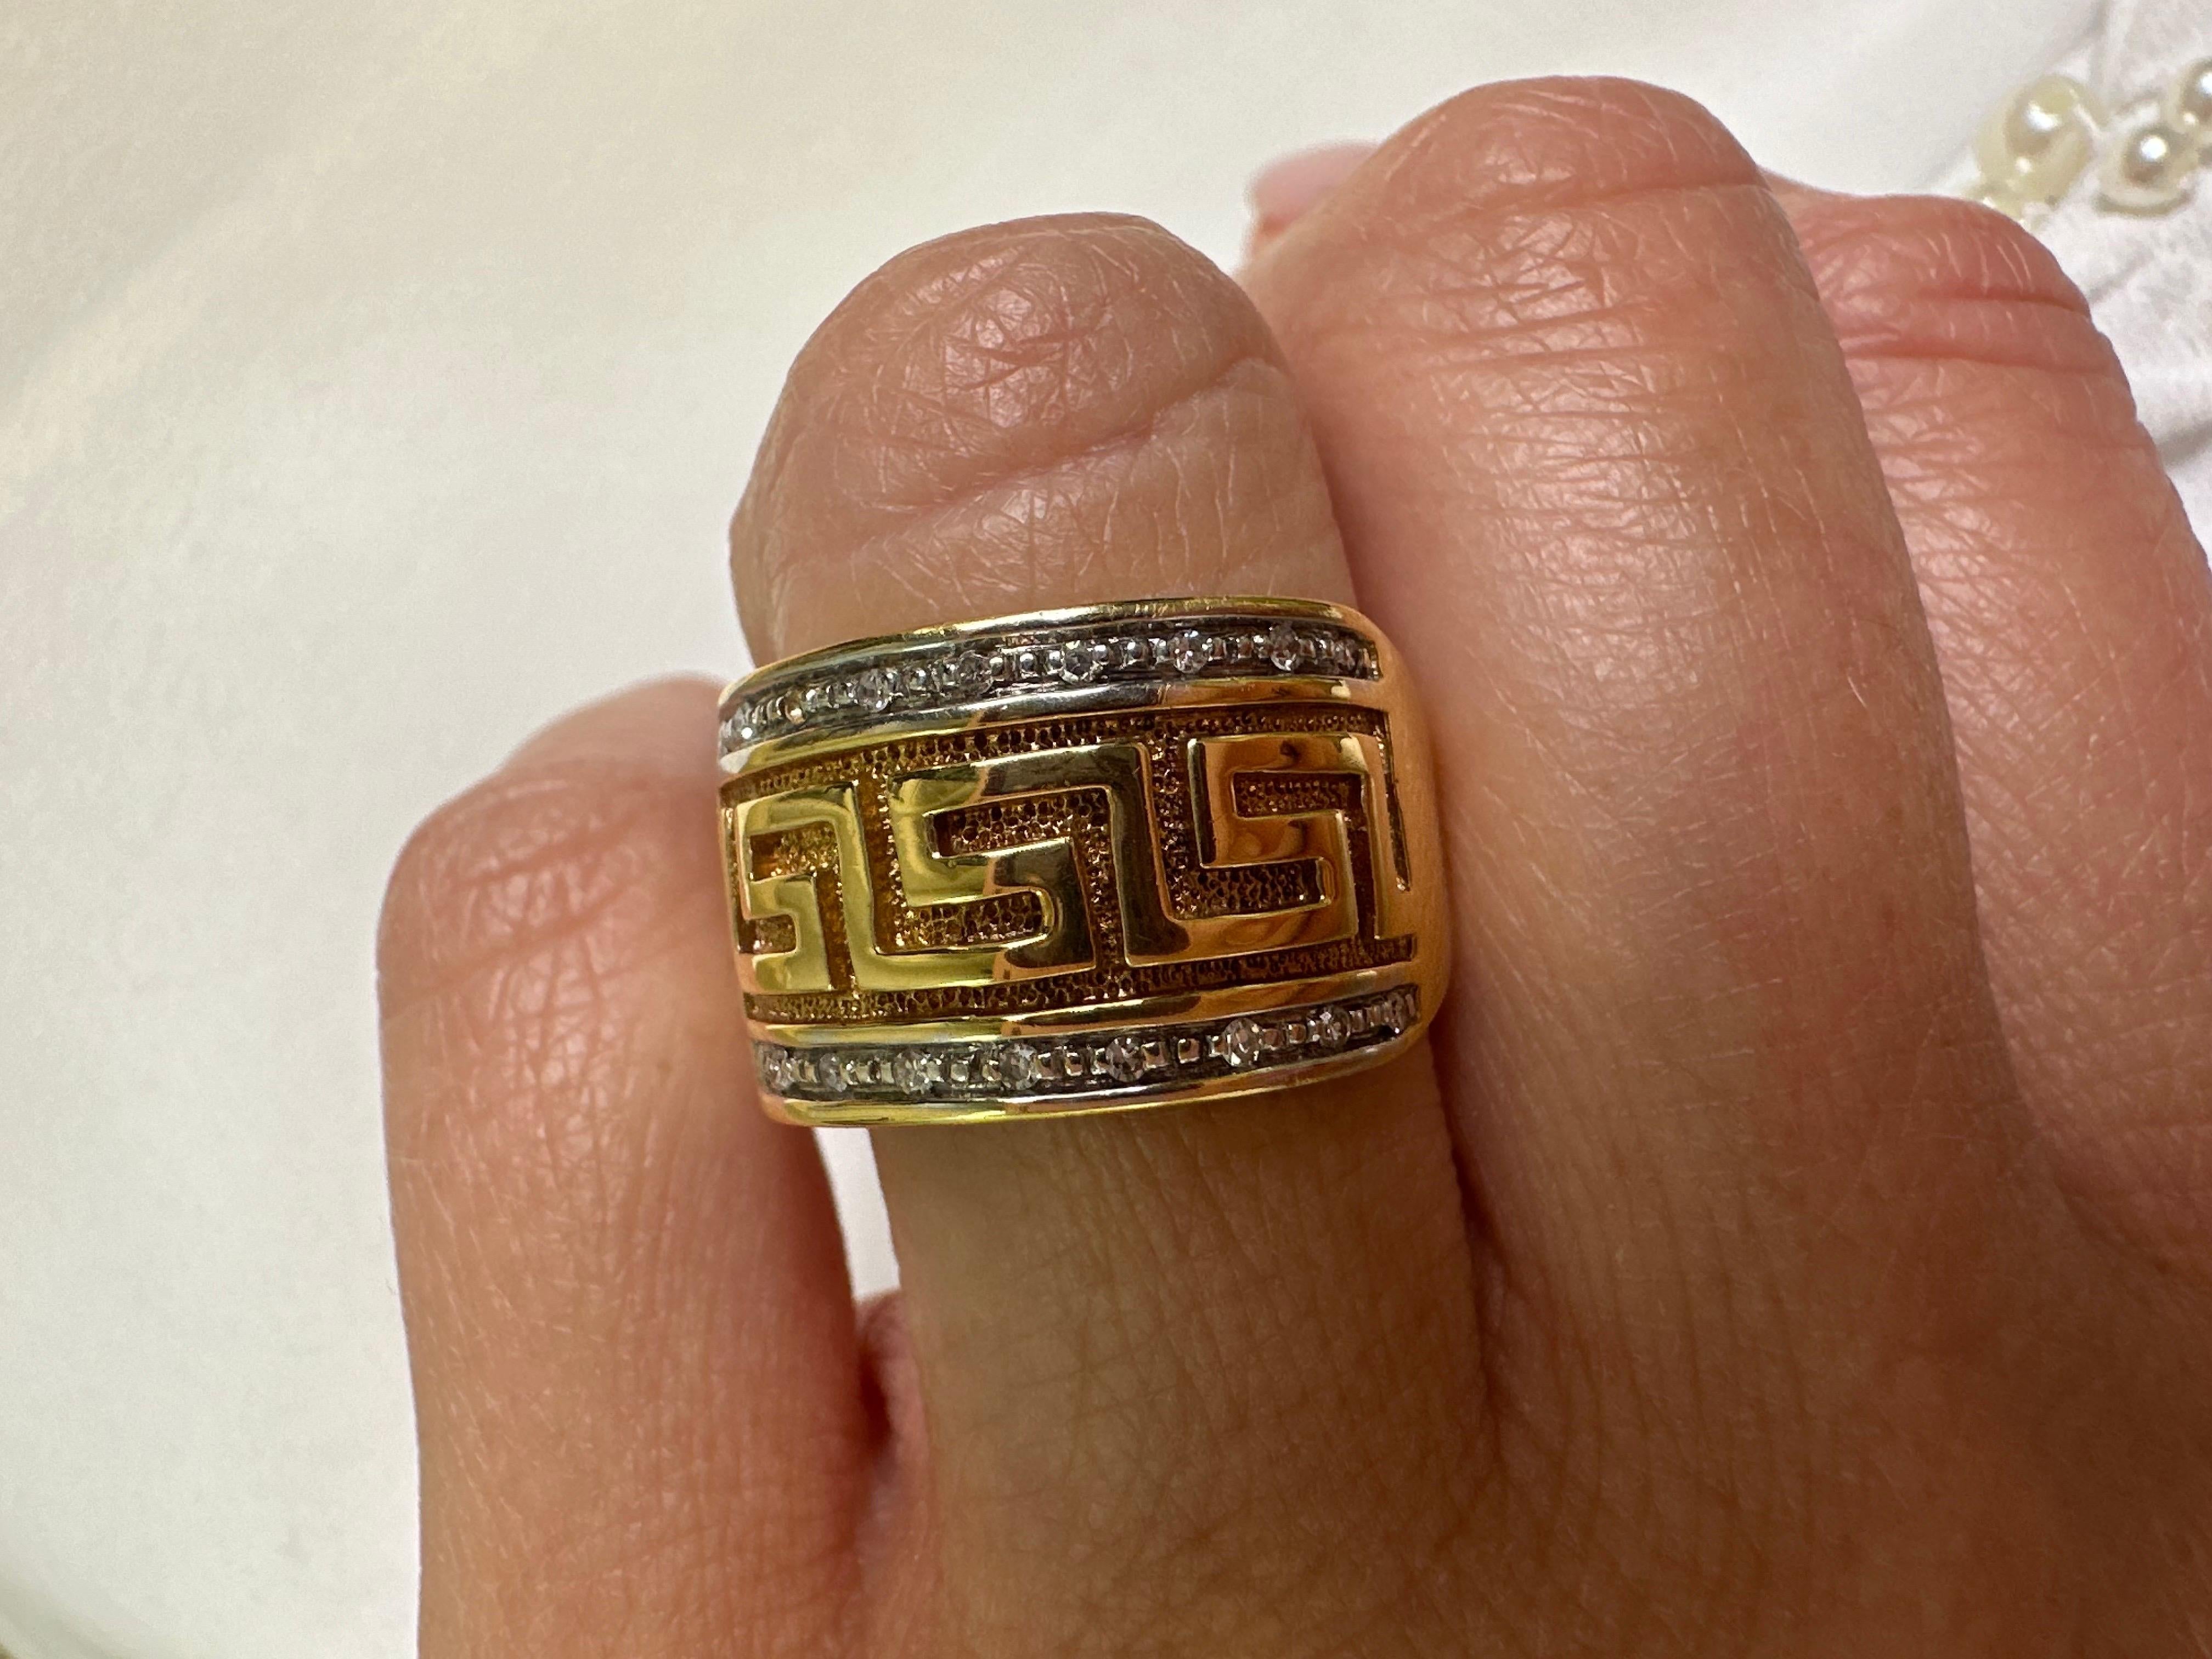 Pretty wide ring with popular pattern in 14KT gold! Ring can be re-sized!

Metal Type: 14KT

Certificate of authenticity comes with purchase!

ABOUT US
We are a family-owned business. Our studio in located in the heart of Boca Raton at the